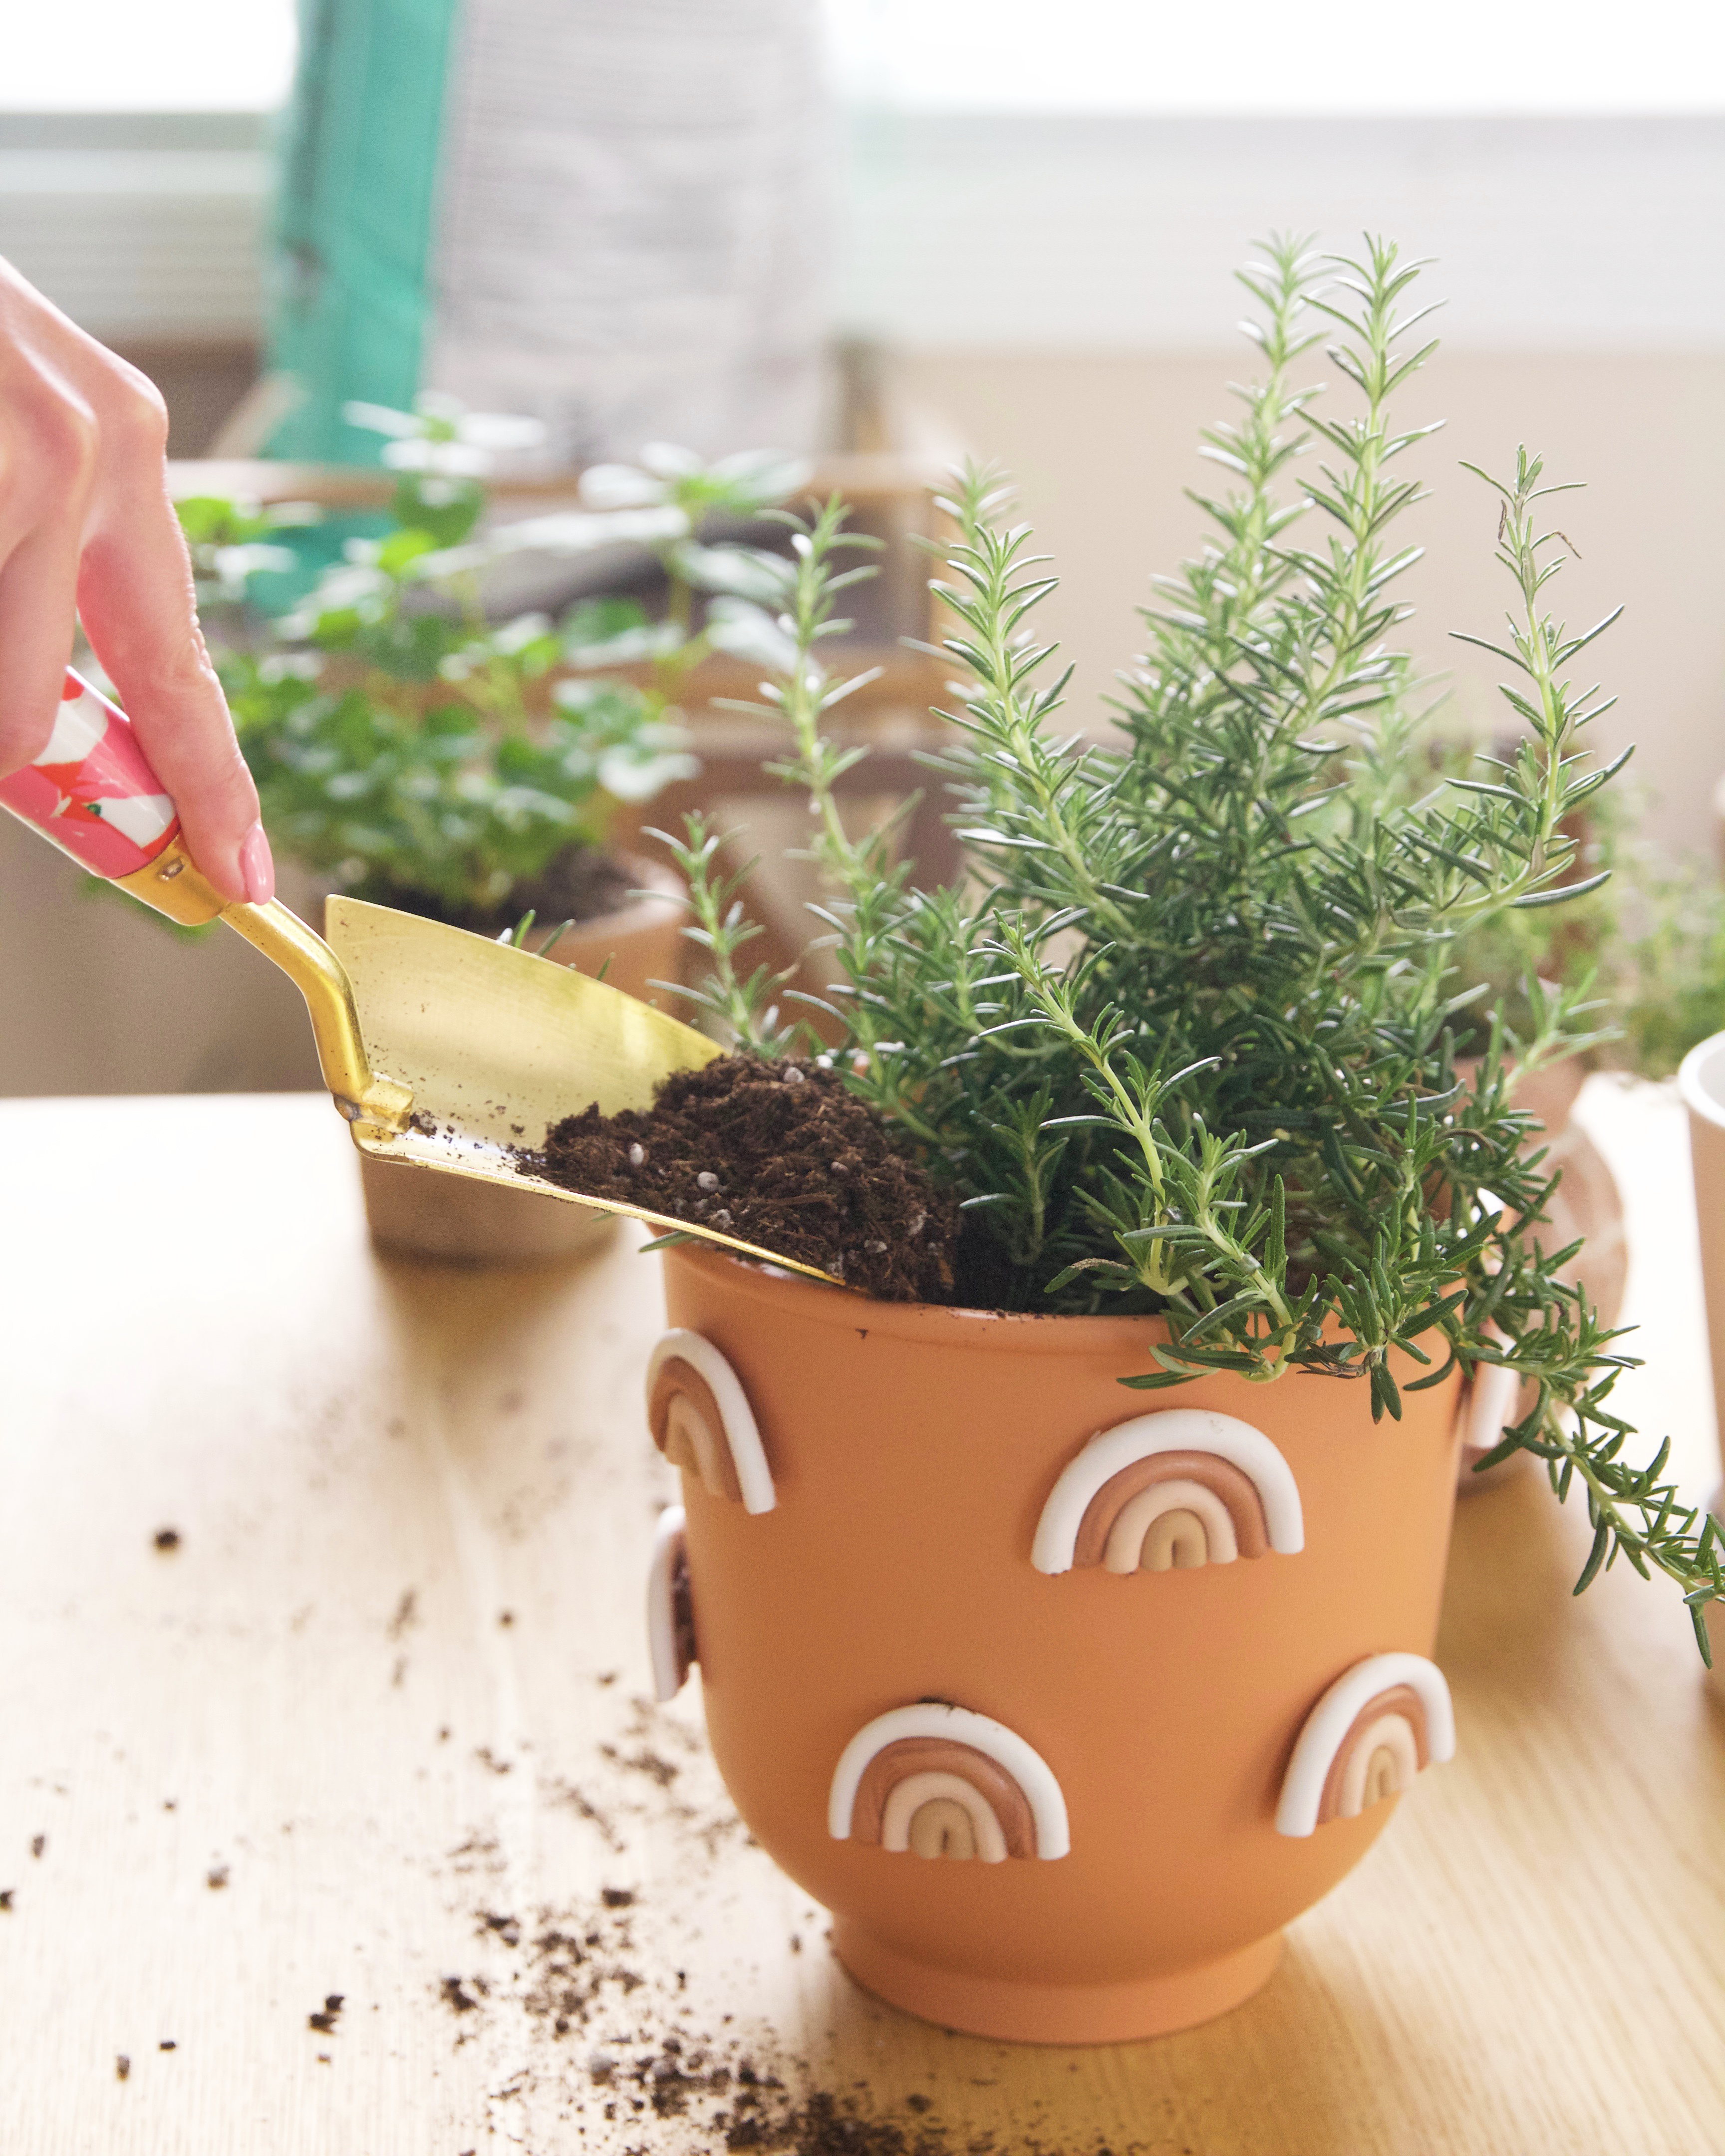 Rosemary Plant Care How To Grow Rosemary Indoors Apartment Therapy,Marscapone